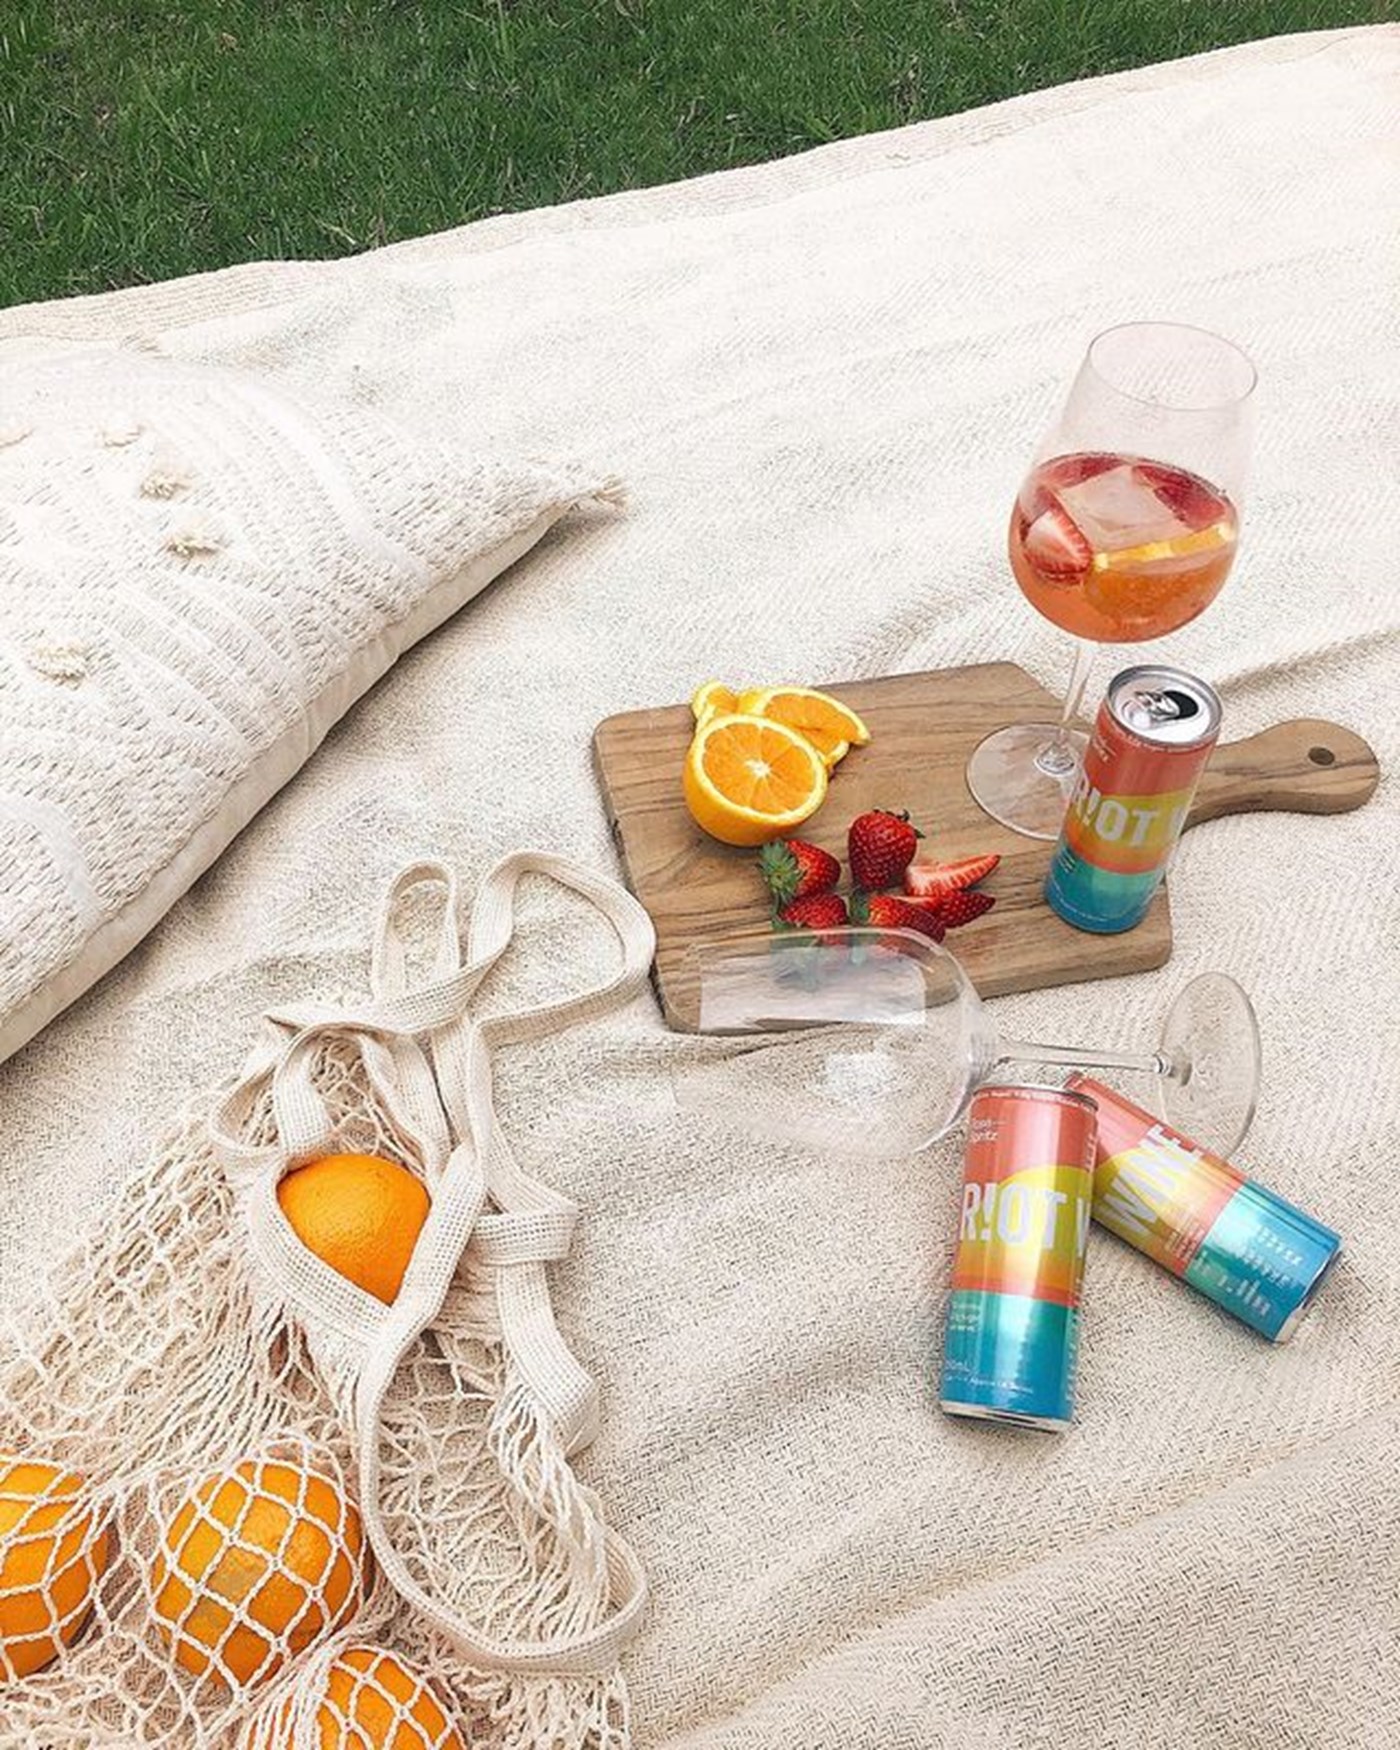 Rose Spritz, Riot Wine Co (Photo credit: @stephily)